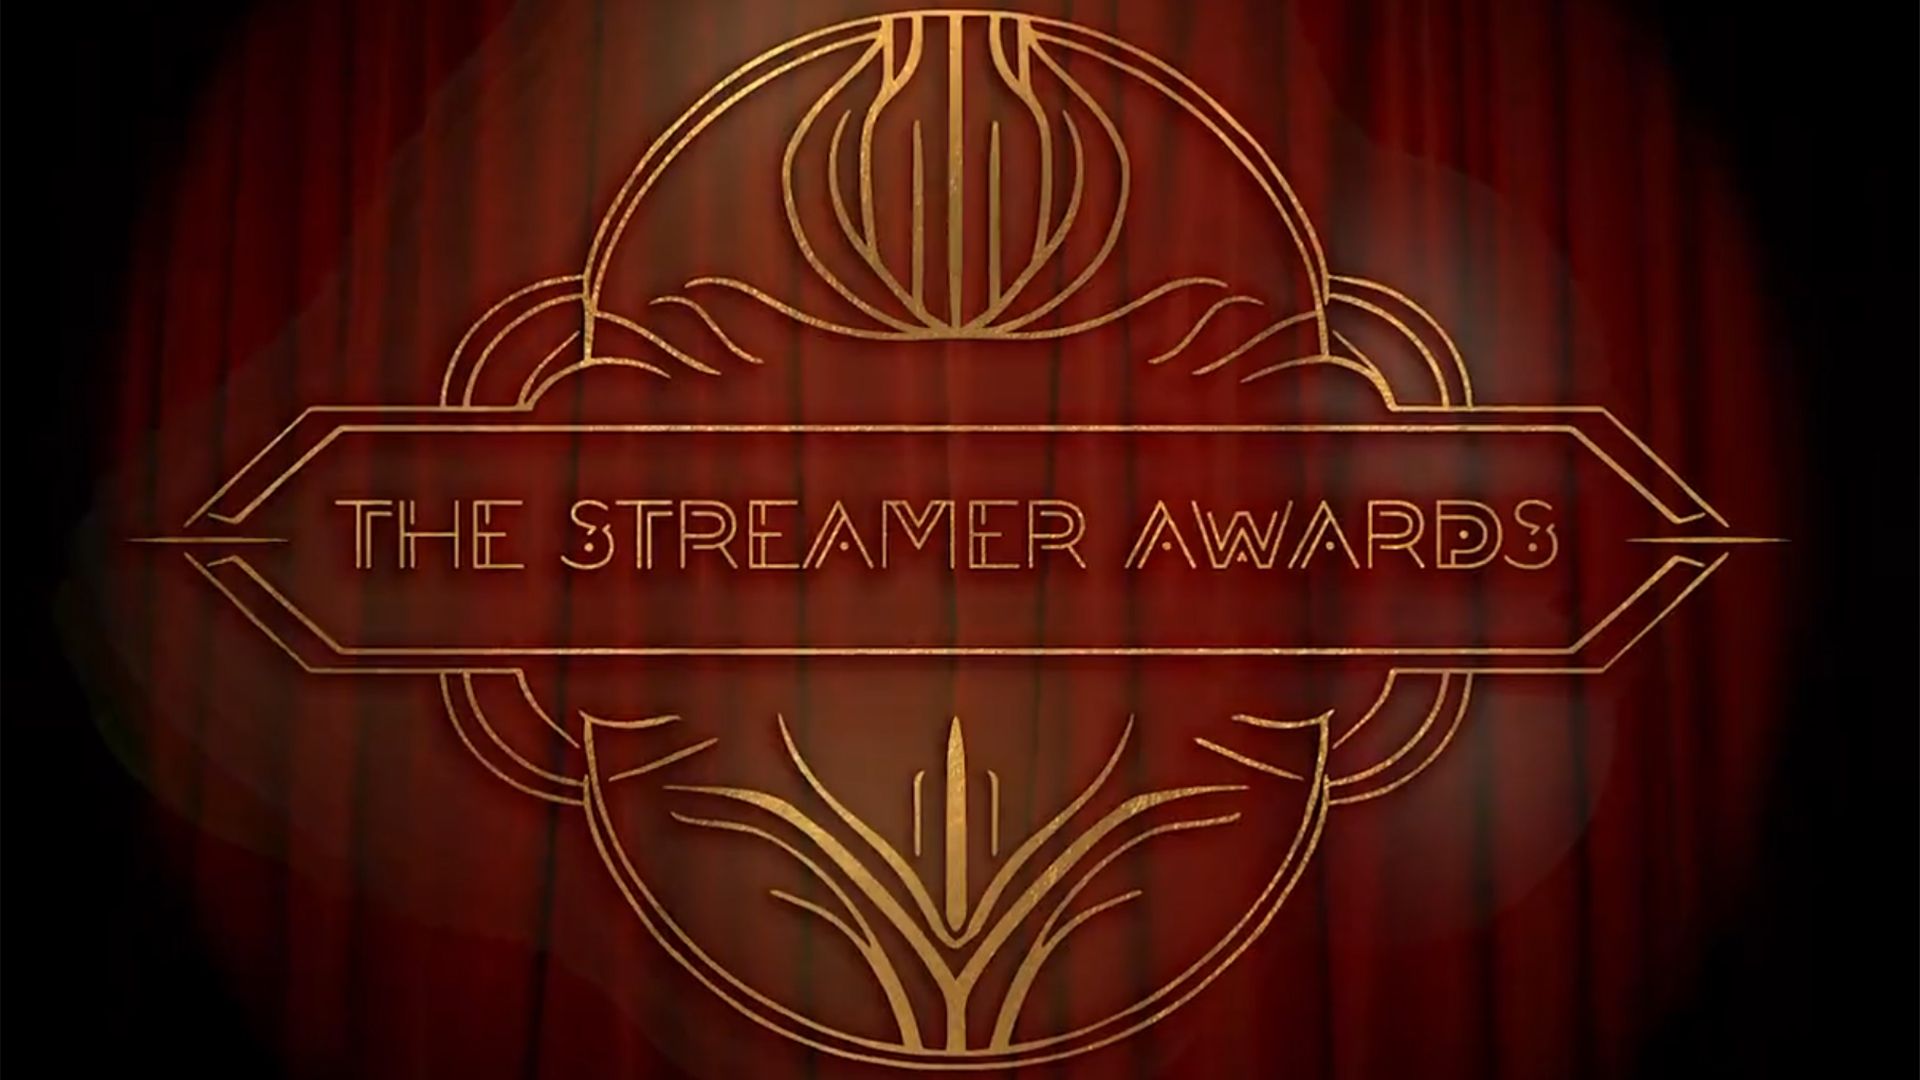 The Streamer Awards Highlighted (and Became) Performance Art